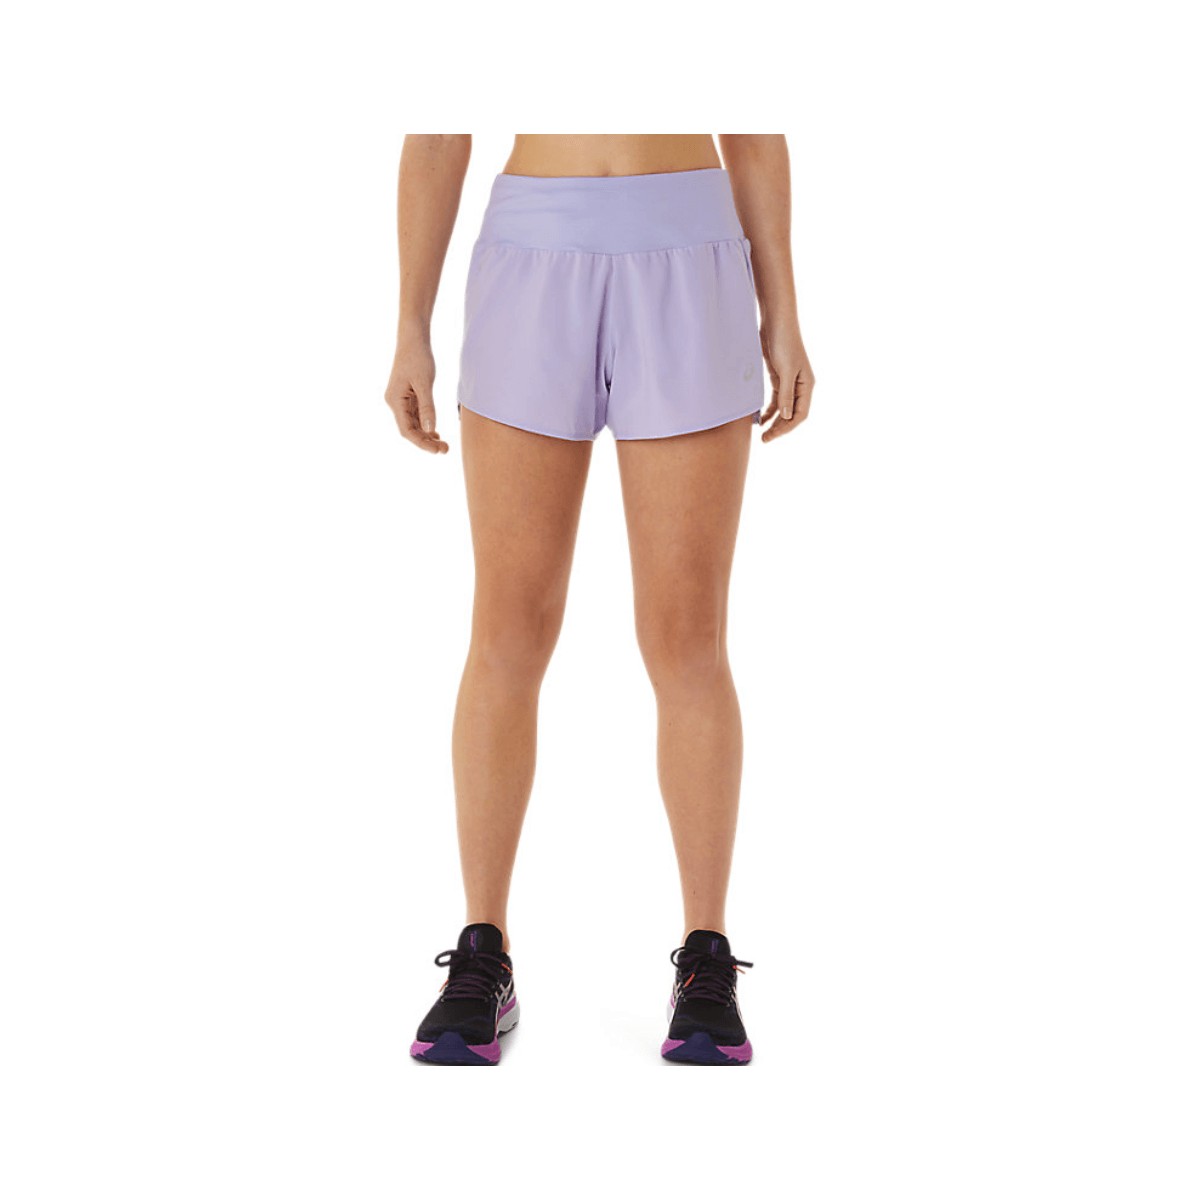 Asics Road 3.5IN Shorts Violet Woman, Size XS